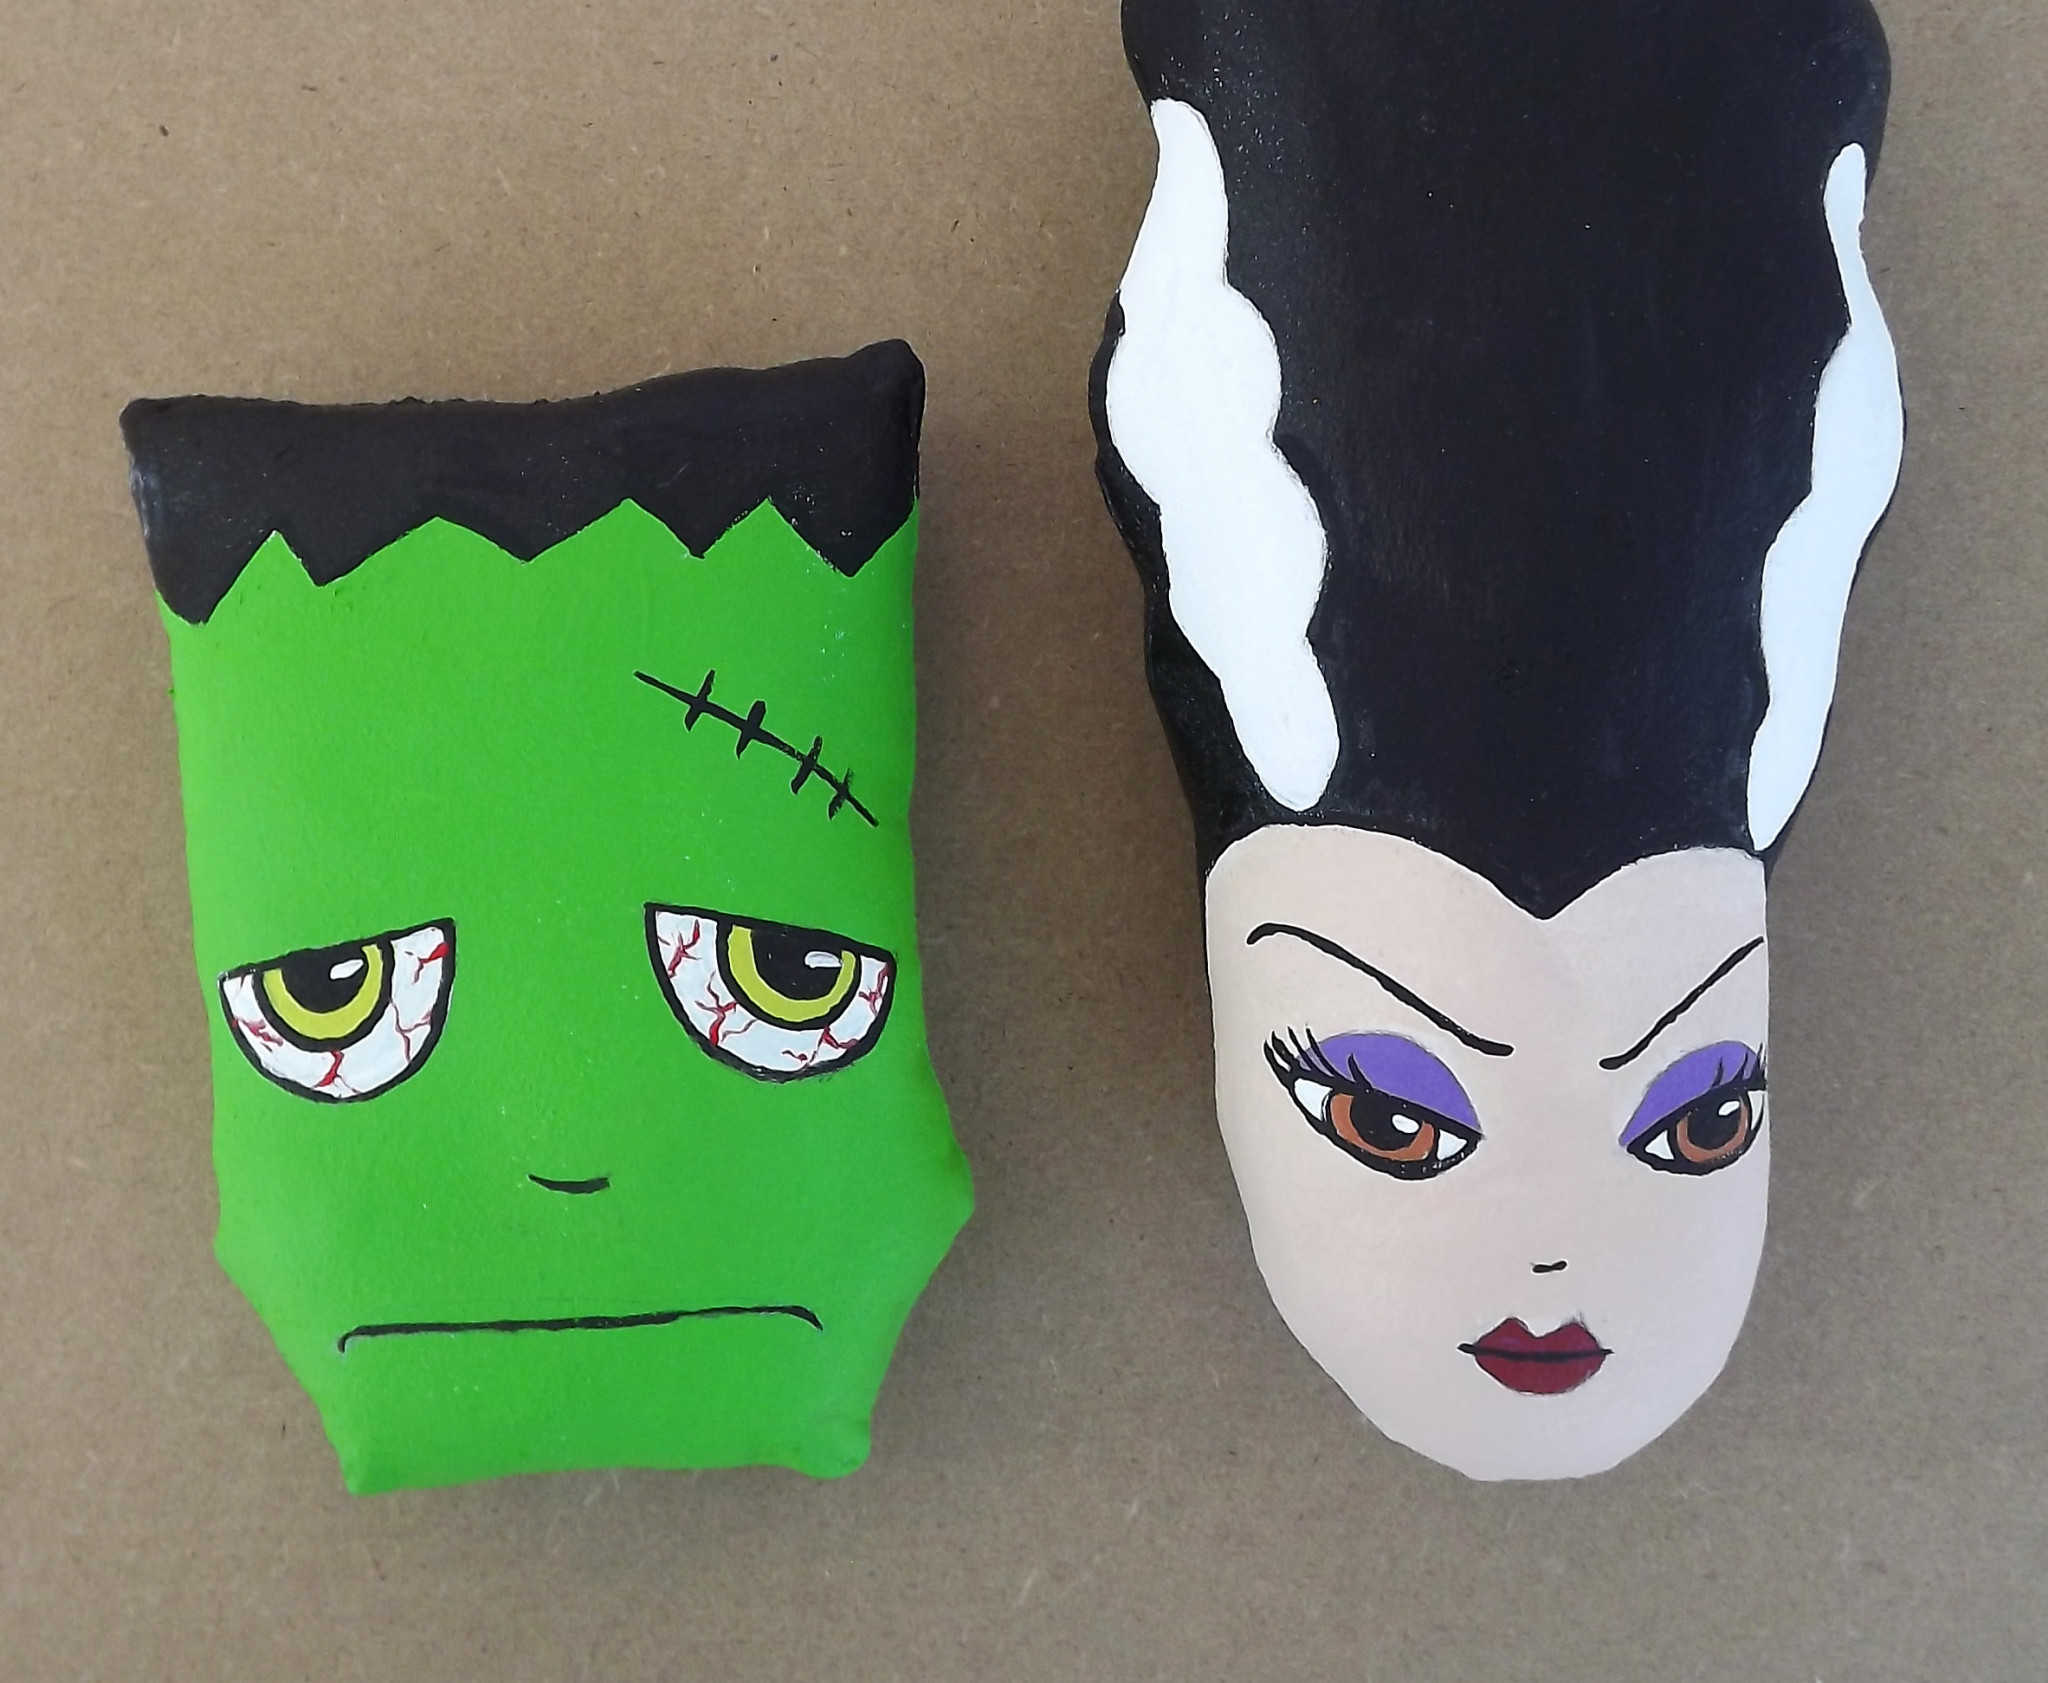 How to make a DIY Frankenstein doll - Step 9, check it out at https://diyprojects.com/halloween-arts-and-crafts-diy-mr-mrs-frankenstein-cloth-dolls